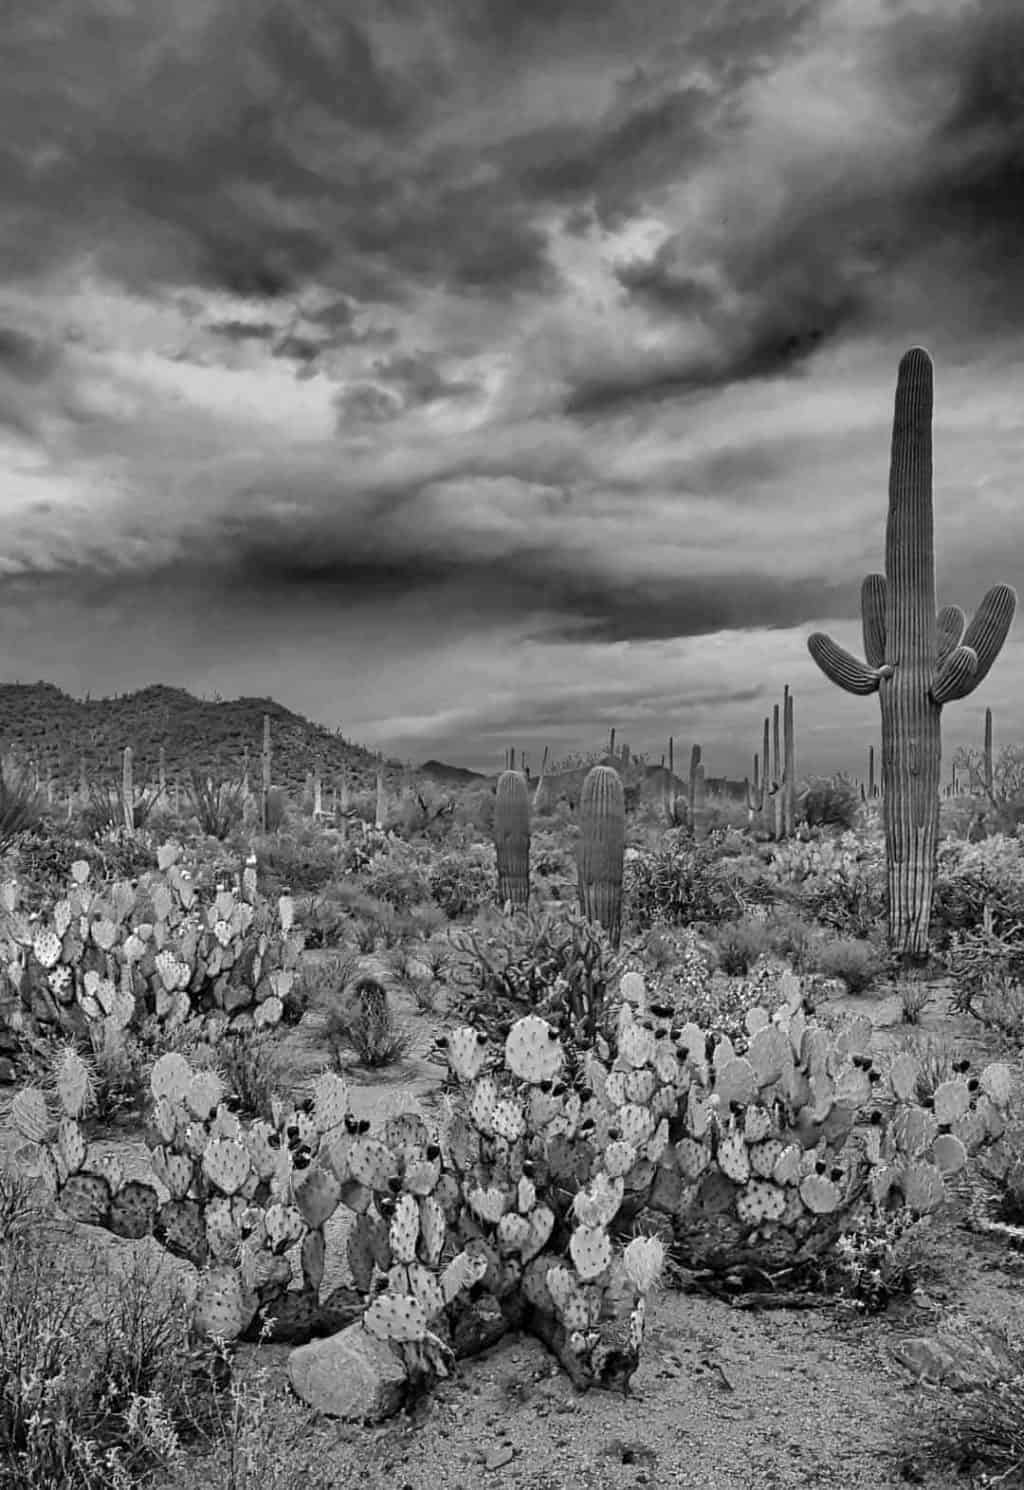 A field of cacti, including the giant Saguaro cactus, under a dark and moody summer evening sky in Saguaro National Park, Arizona.